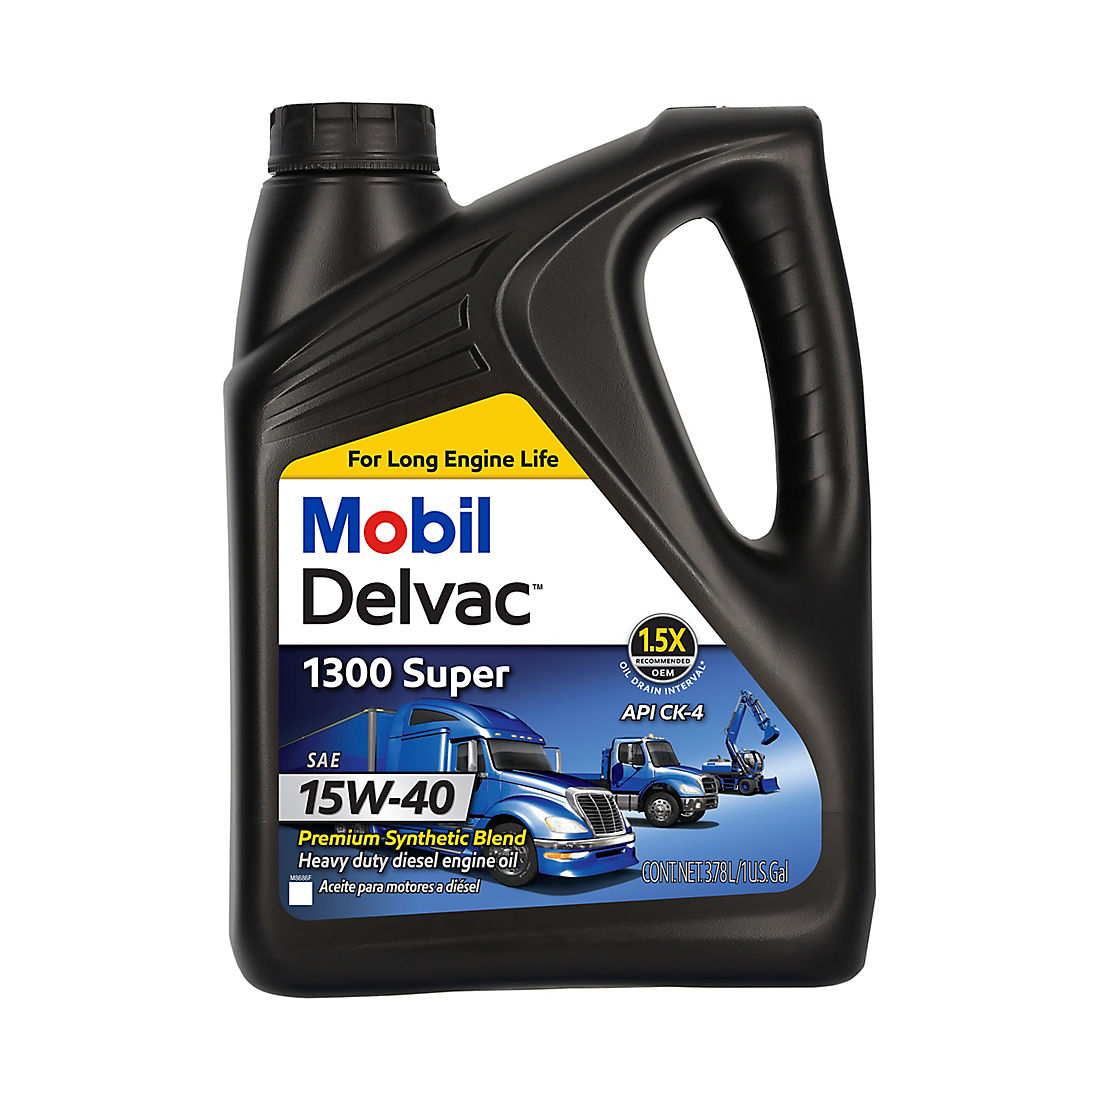 Масло мобил делвак 10w. Mobil Delvac 10w 40 Diesel. Mobil 10w 40 Synthetic engine Oil. Мобил Делвак 10w 50. Oil Motor SAE 15w40.